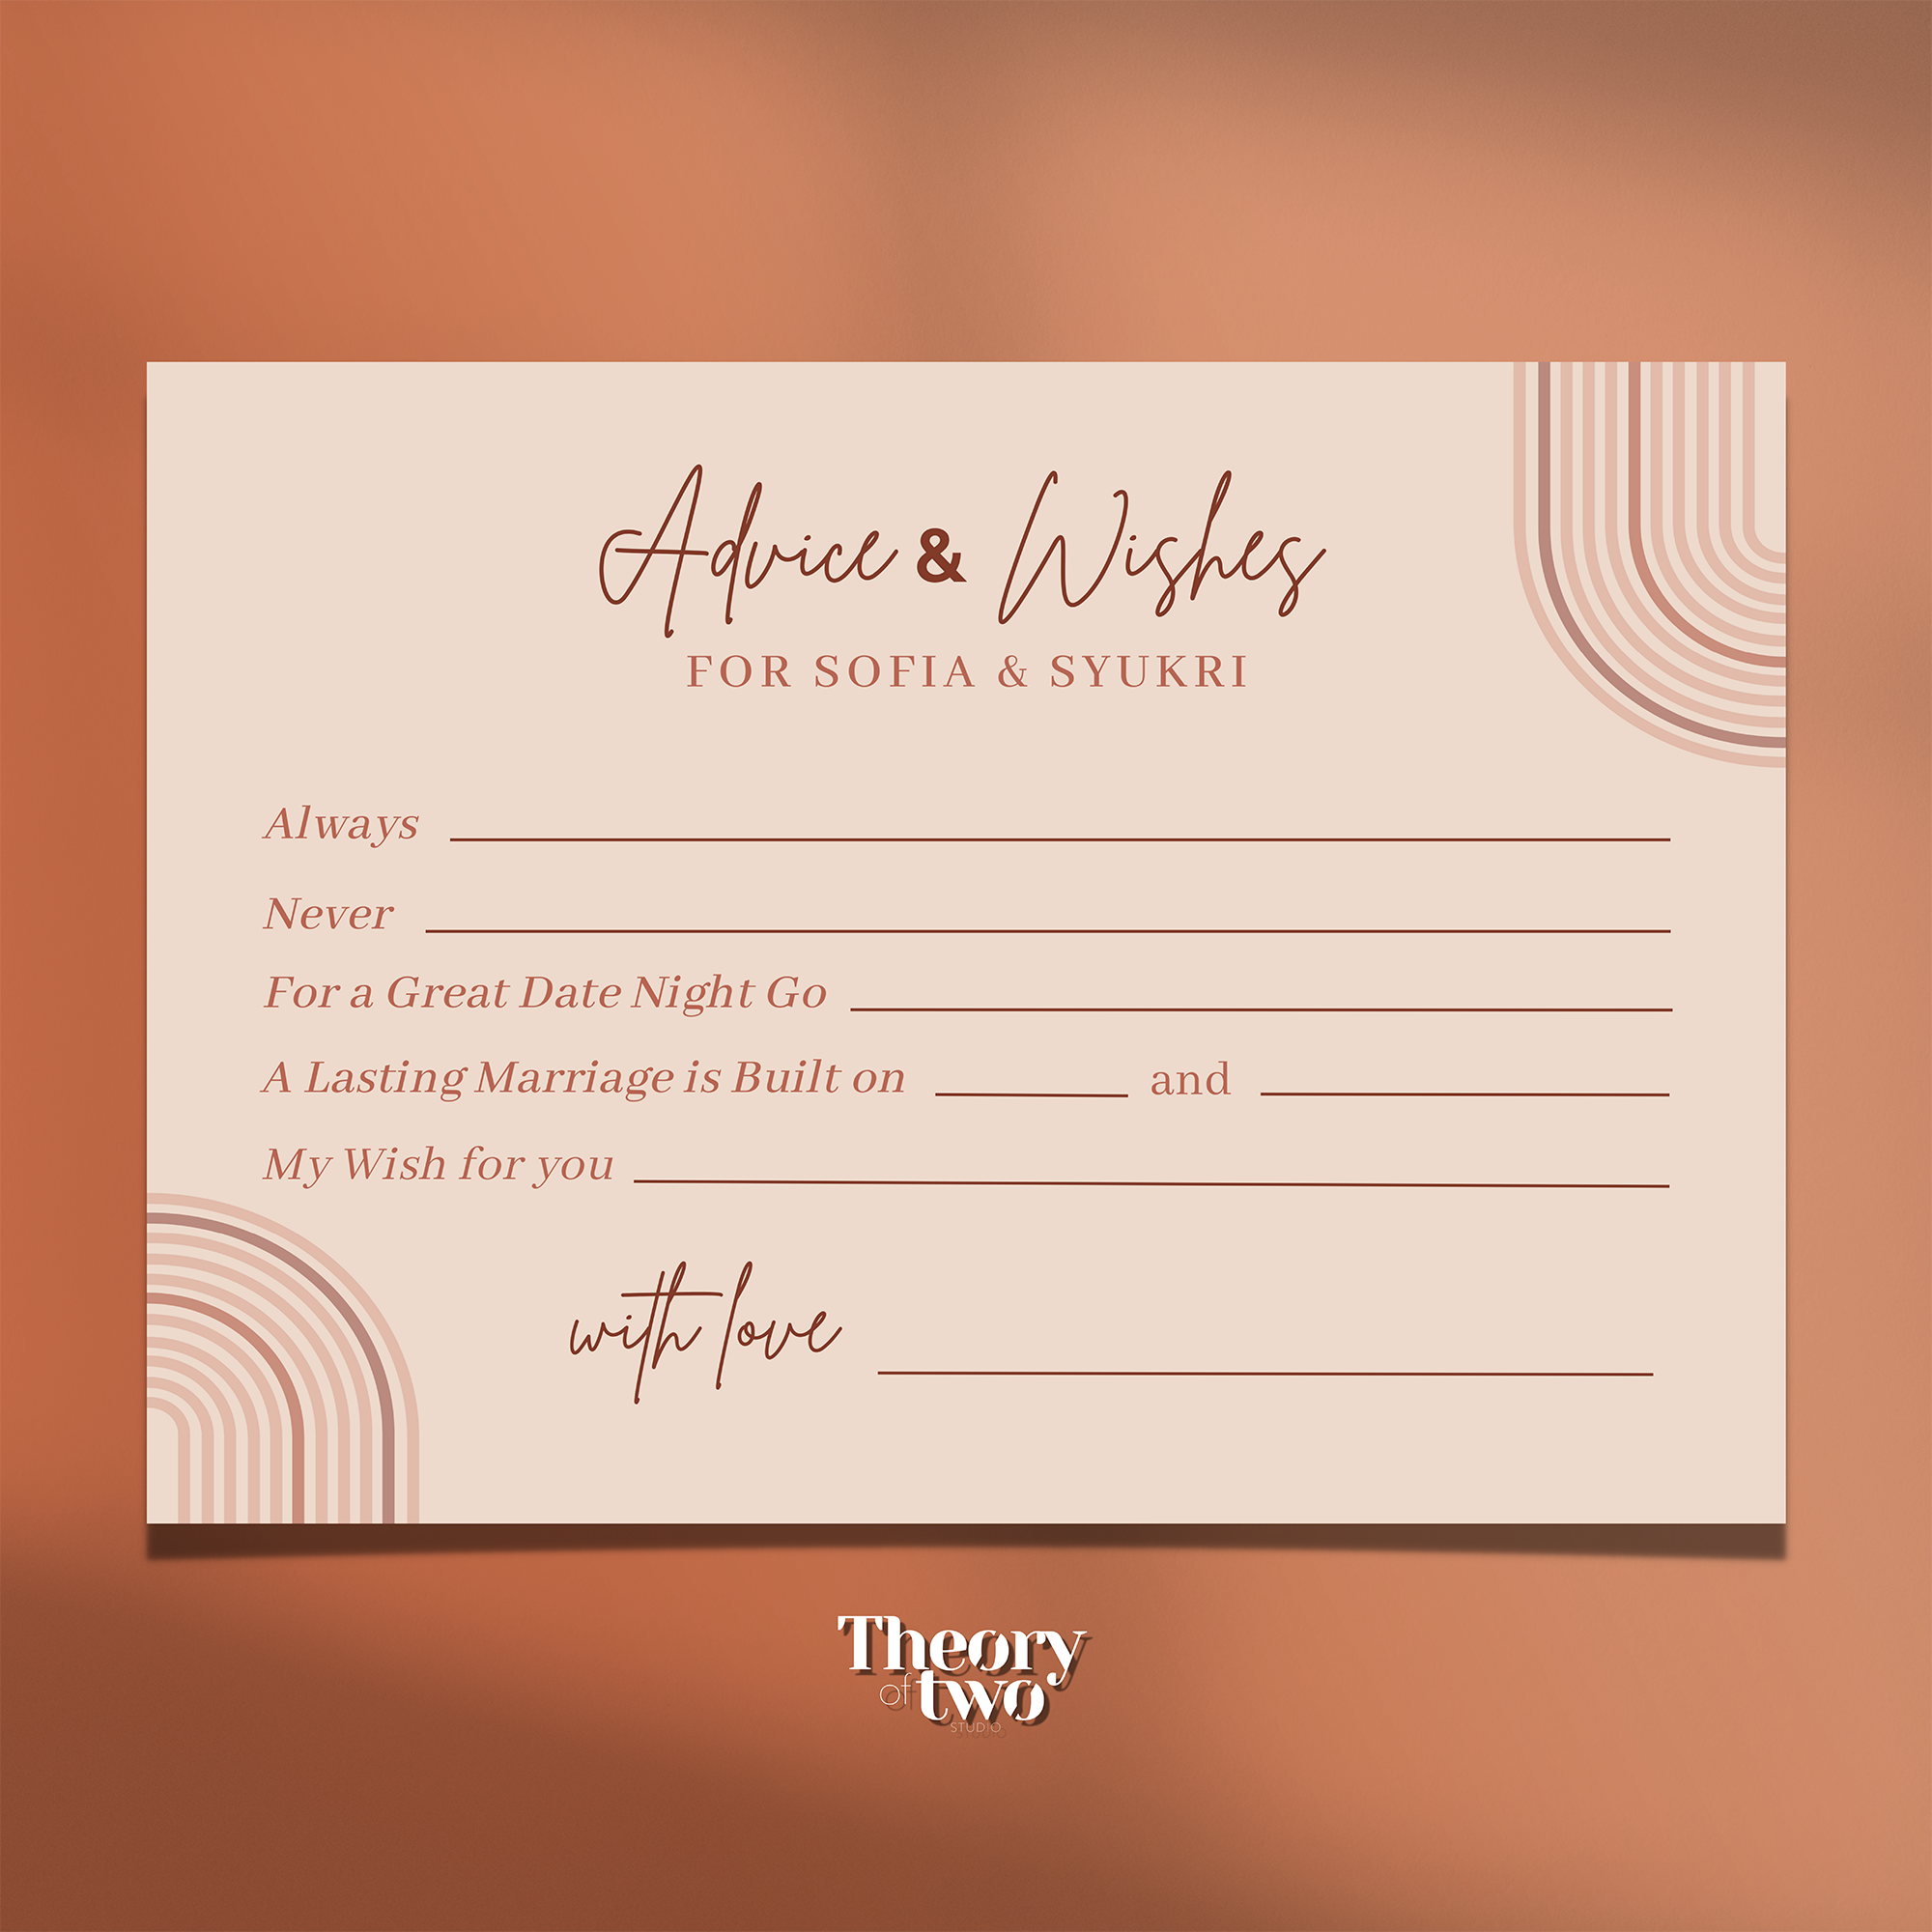 TERRACOTTA AND NUDE WEDDING ADVICE CARDS FOR THE BRIDE AND GROOM | Singapore Wedding Card